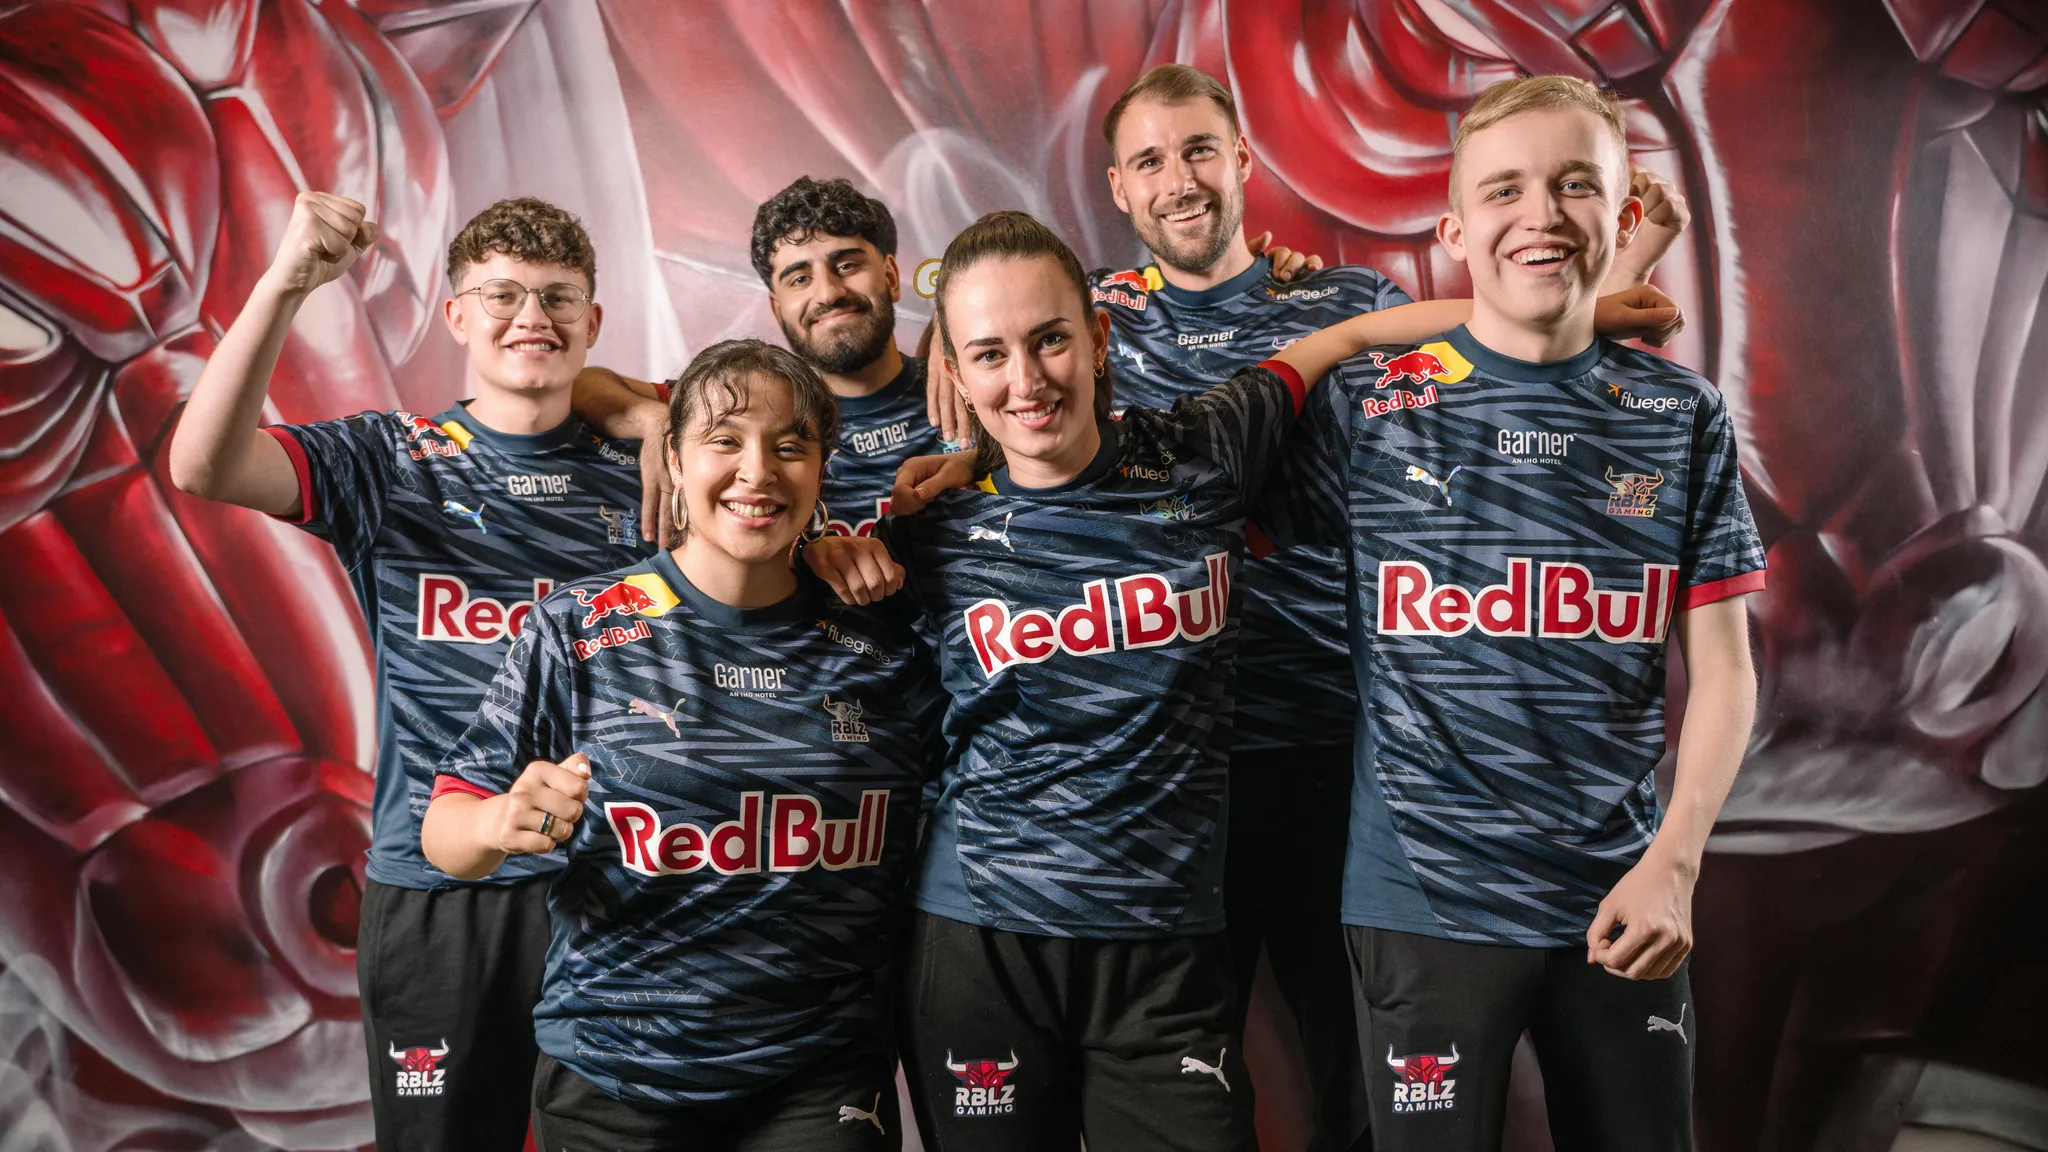 Our RBLZ: The eSports team of RB Leipzig